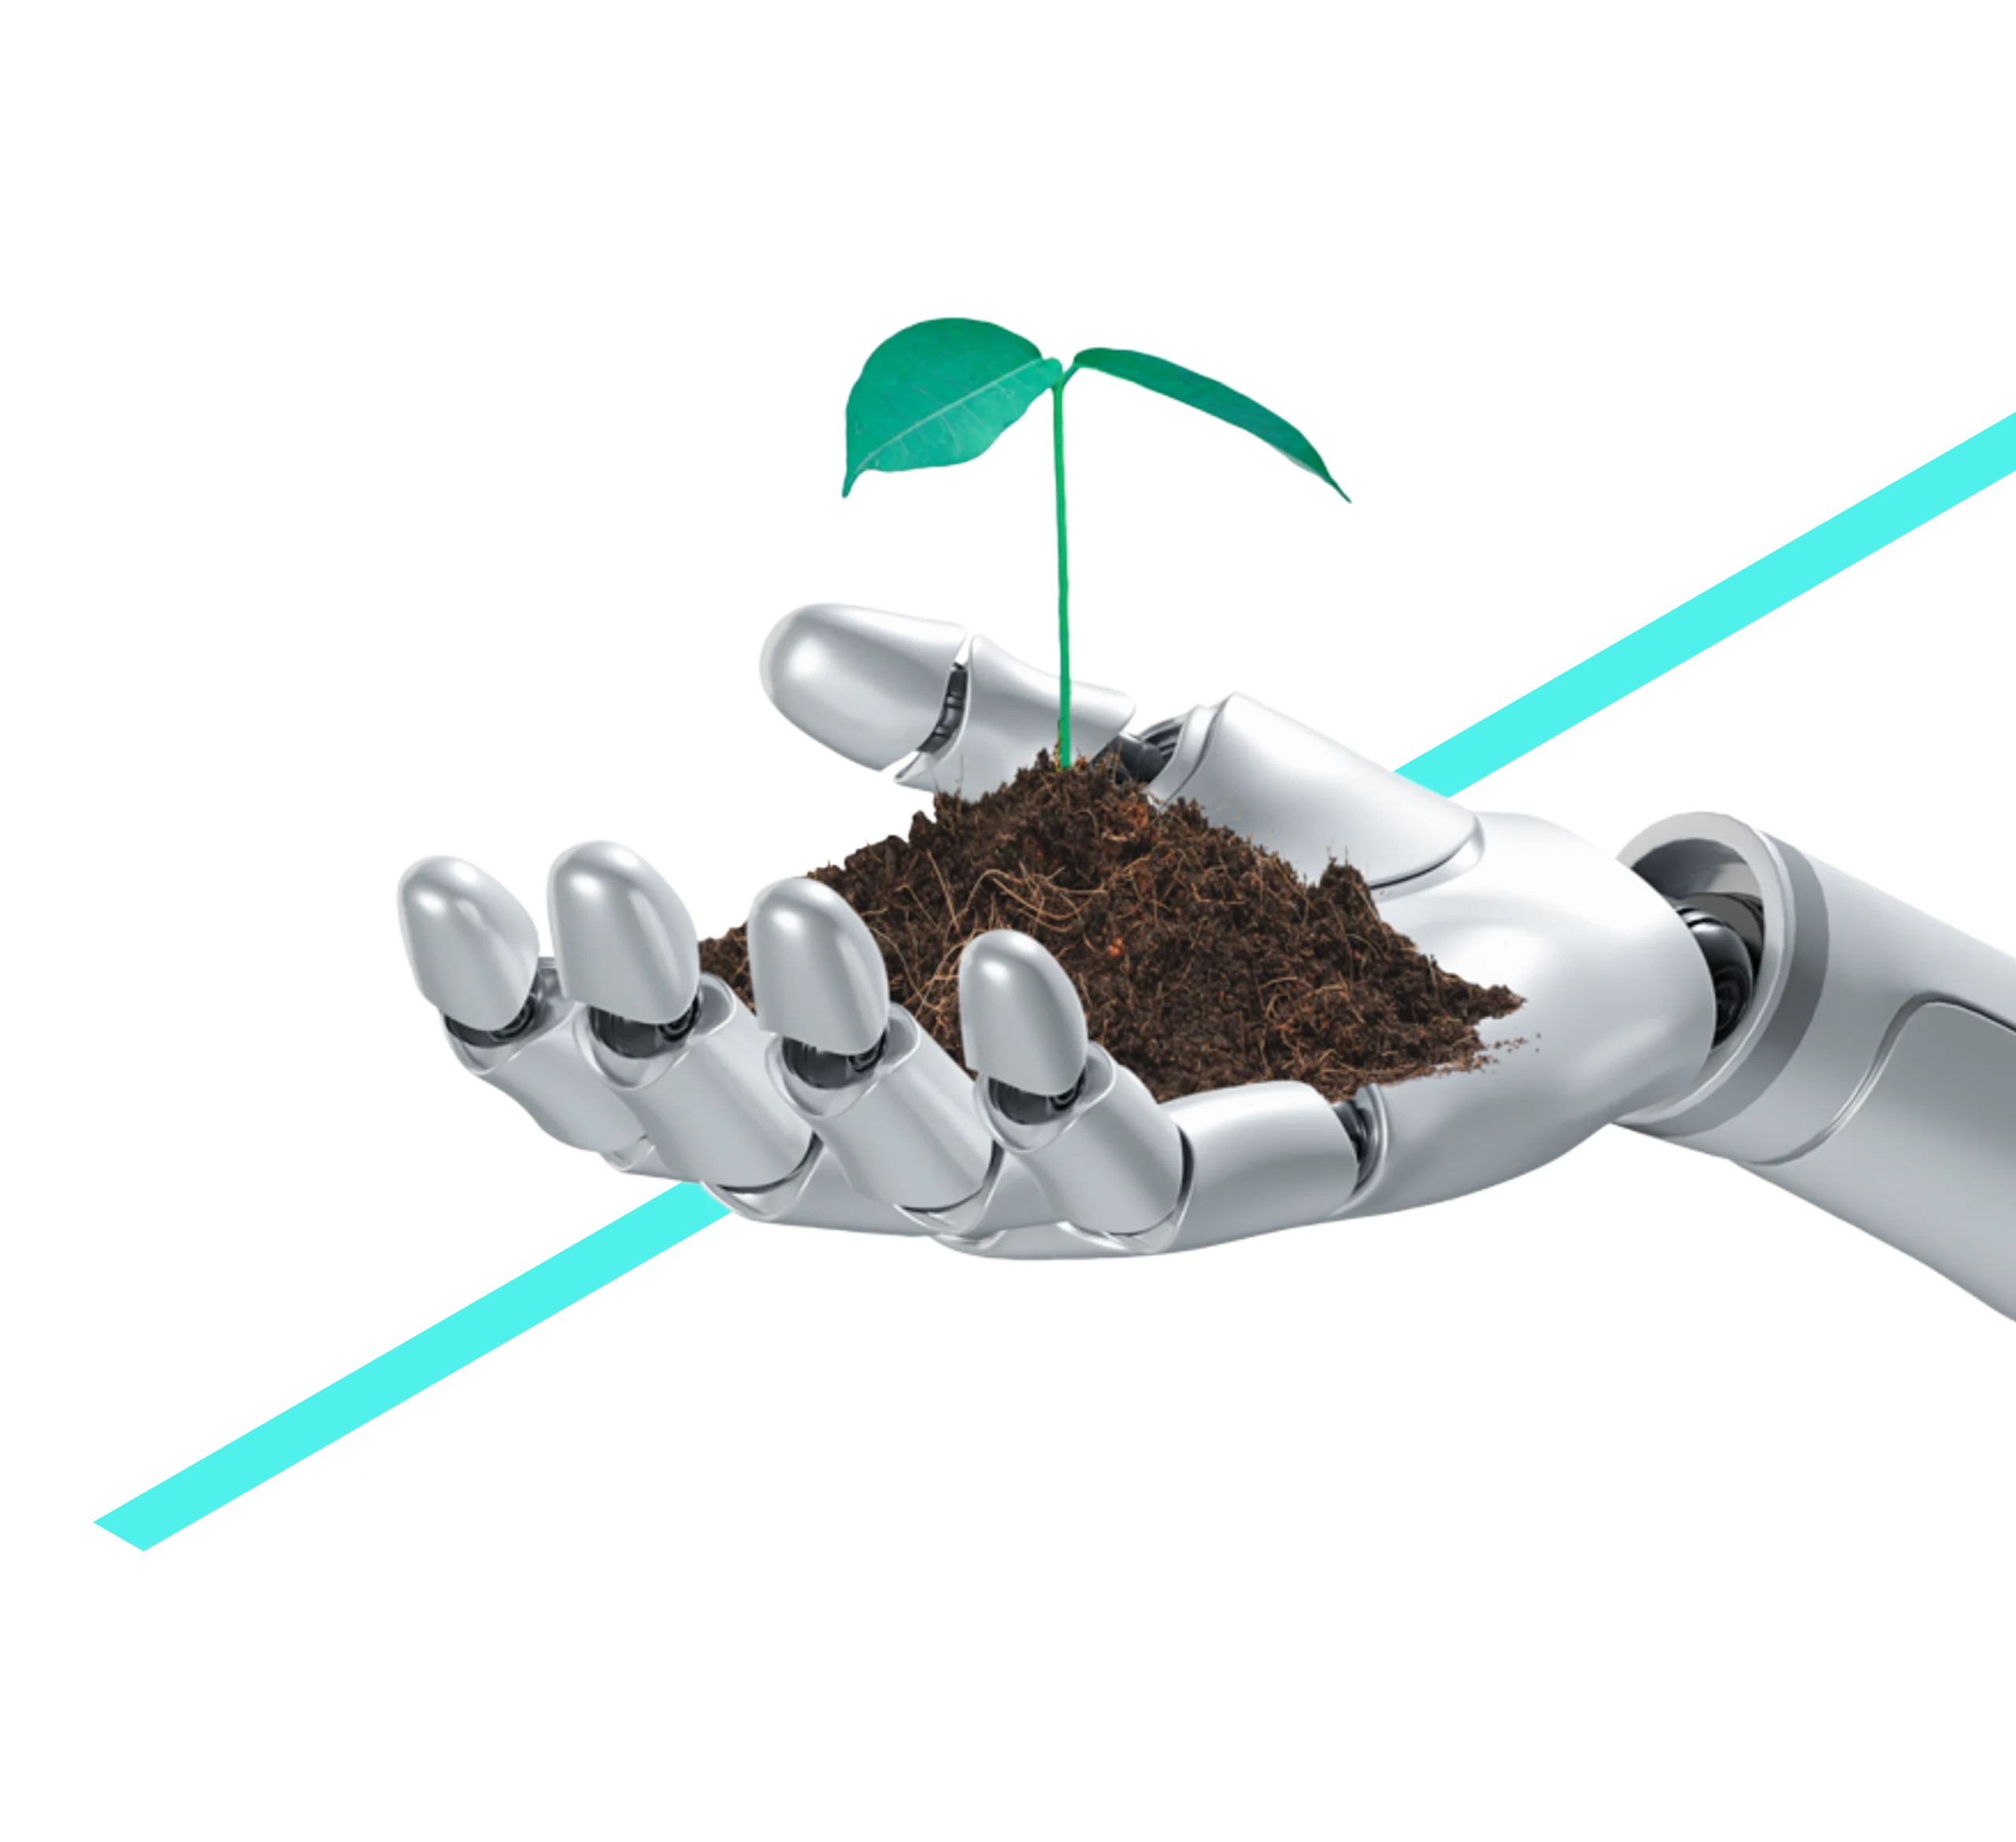 A robot’s hand full of earth and a seedling, in front of a background of graphical stripes